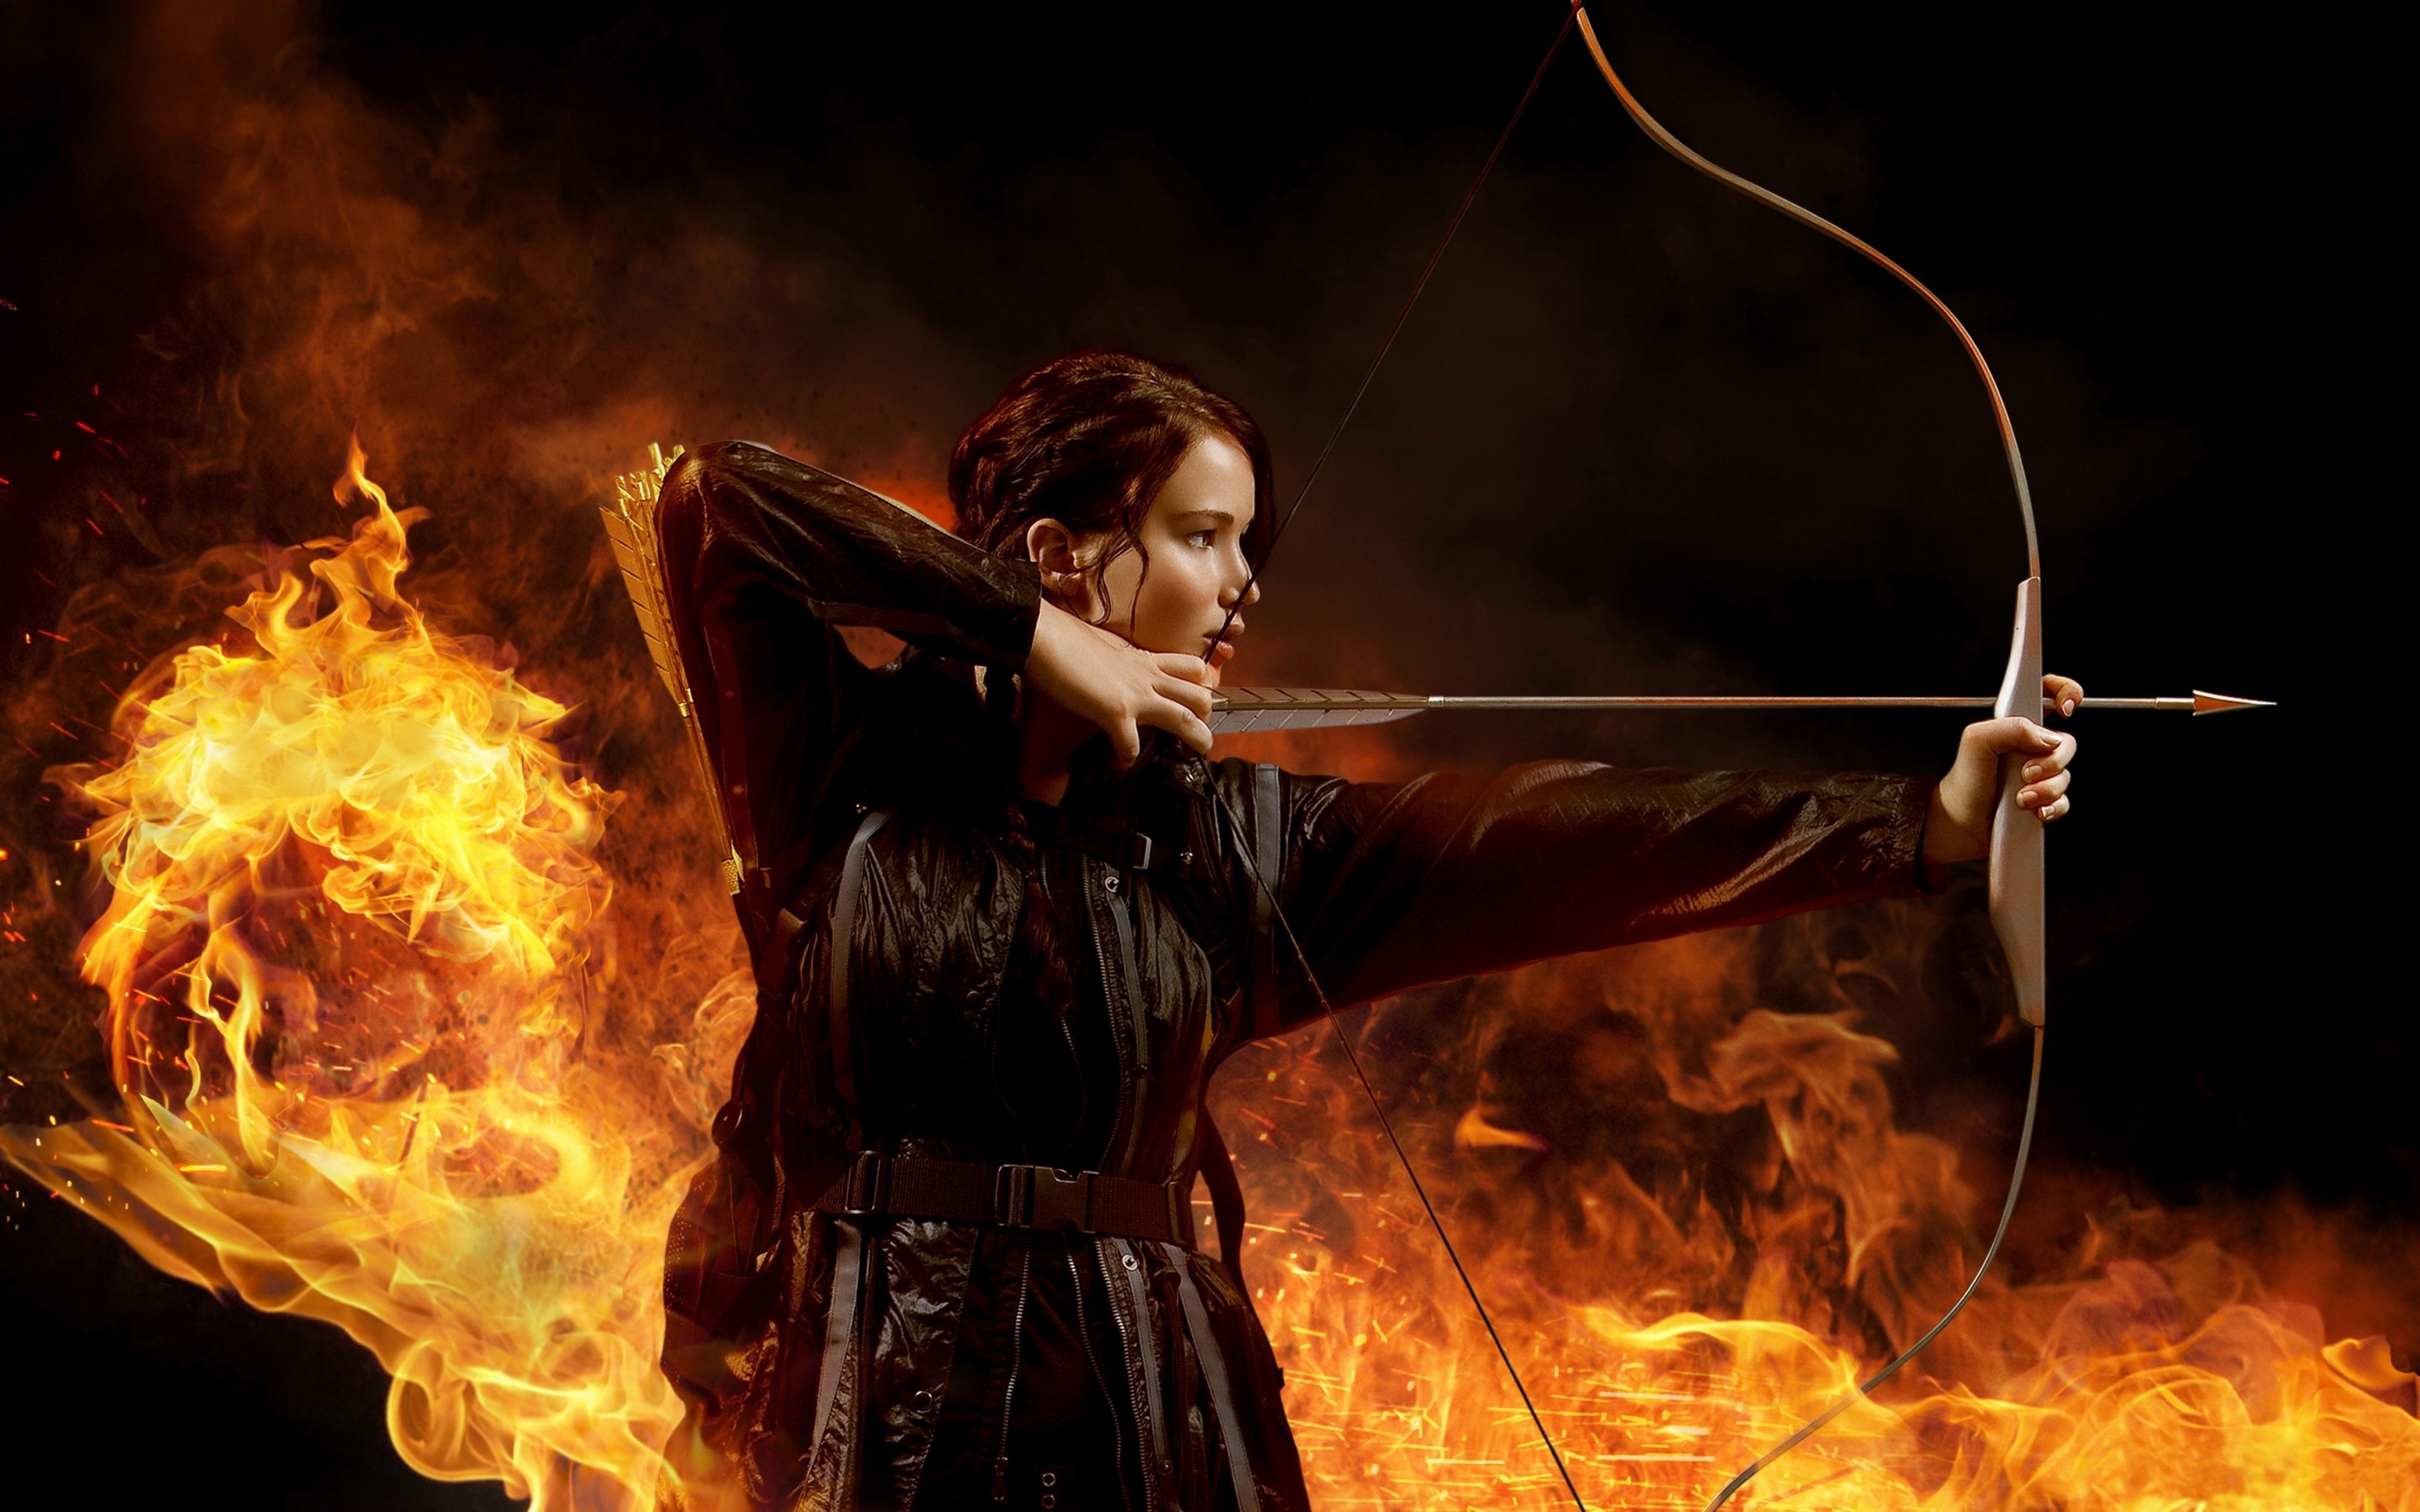 The Hunger Games 2013 for 2880 x 1800 Retina Display resolution